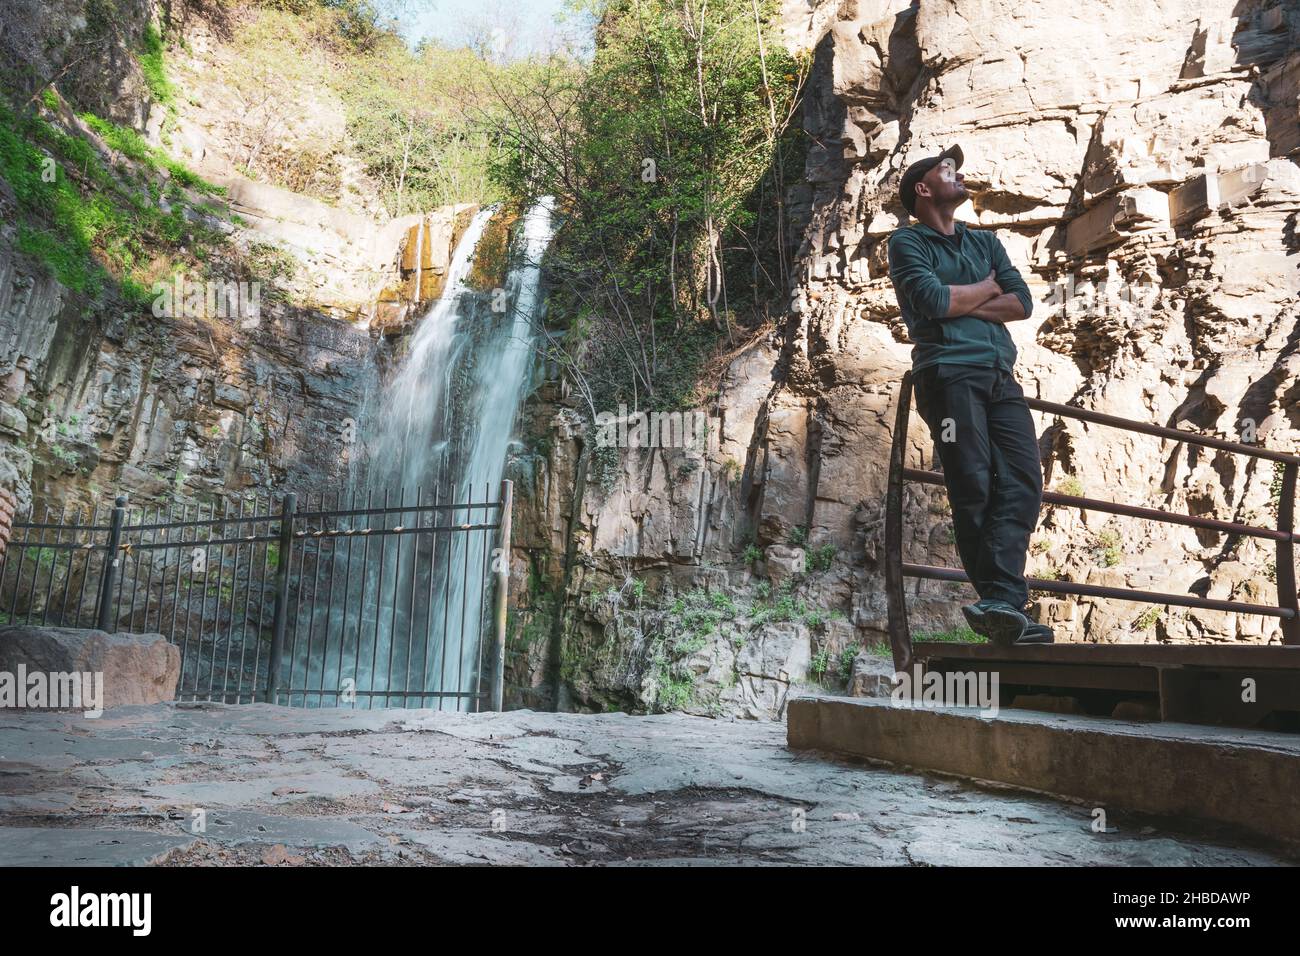 Male tourist standing relaxed in front of Tbilisi waterfall and spring nature. Travel destination - Georgia. 2020 Stock Photo